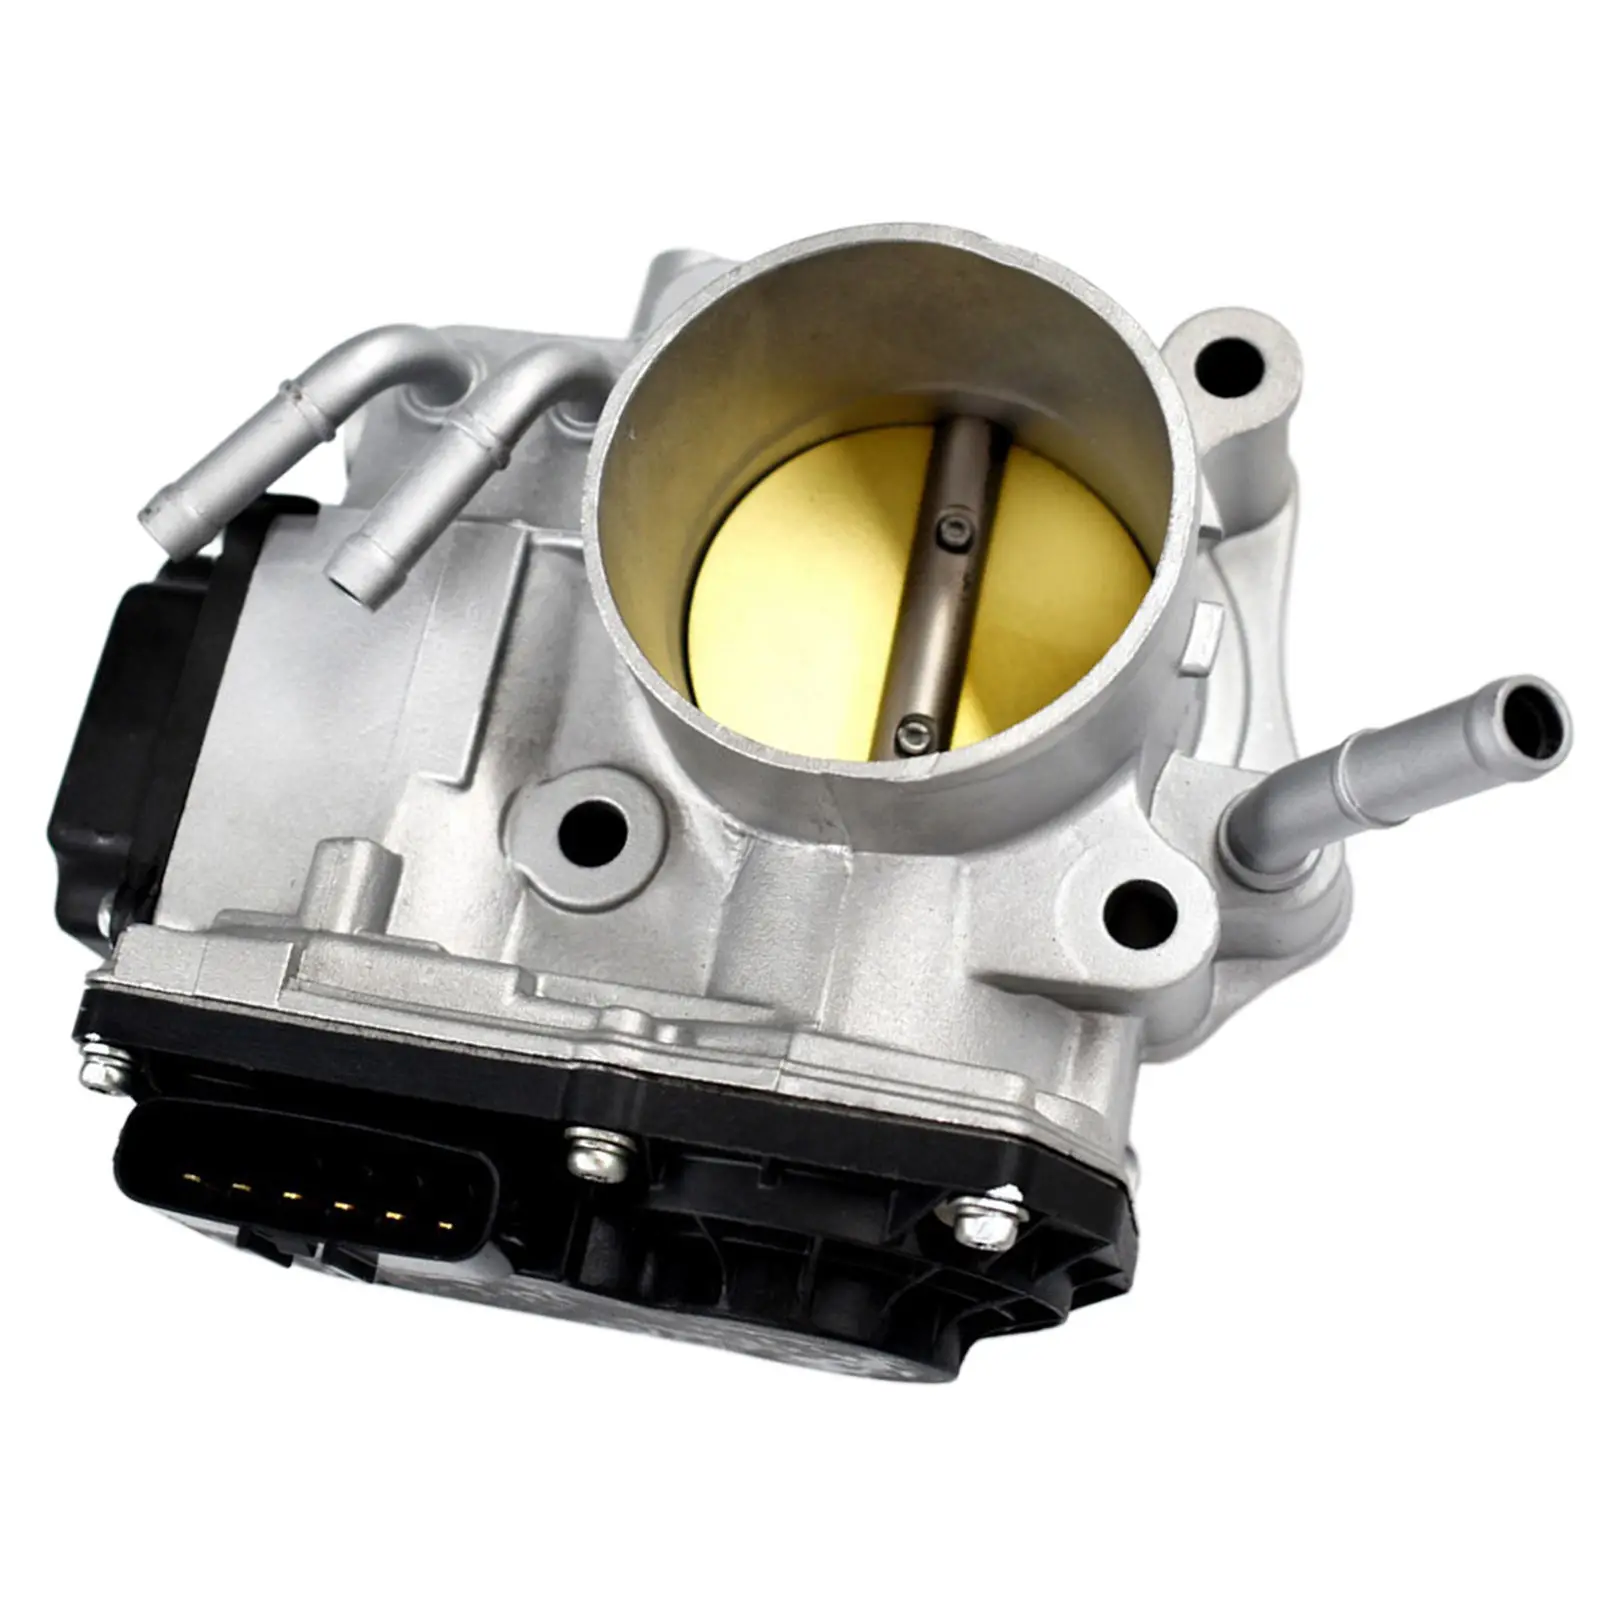 No. 16400-RAA-A6106-07Throttle Body Assembly for Honda Accord 2.4L 2006-2007 Vehicle Parts